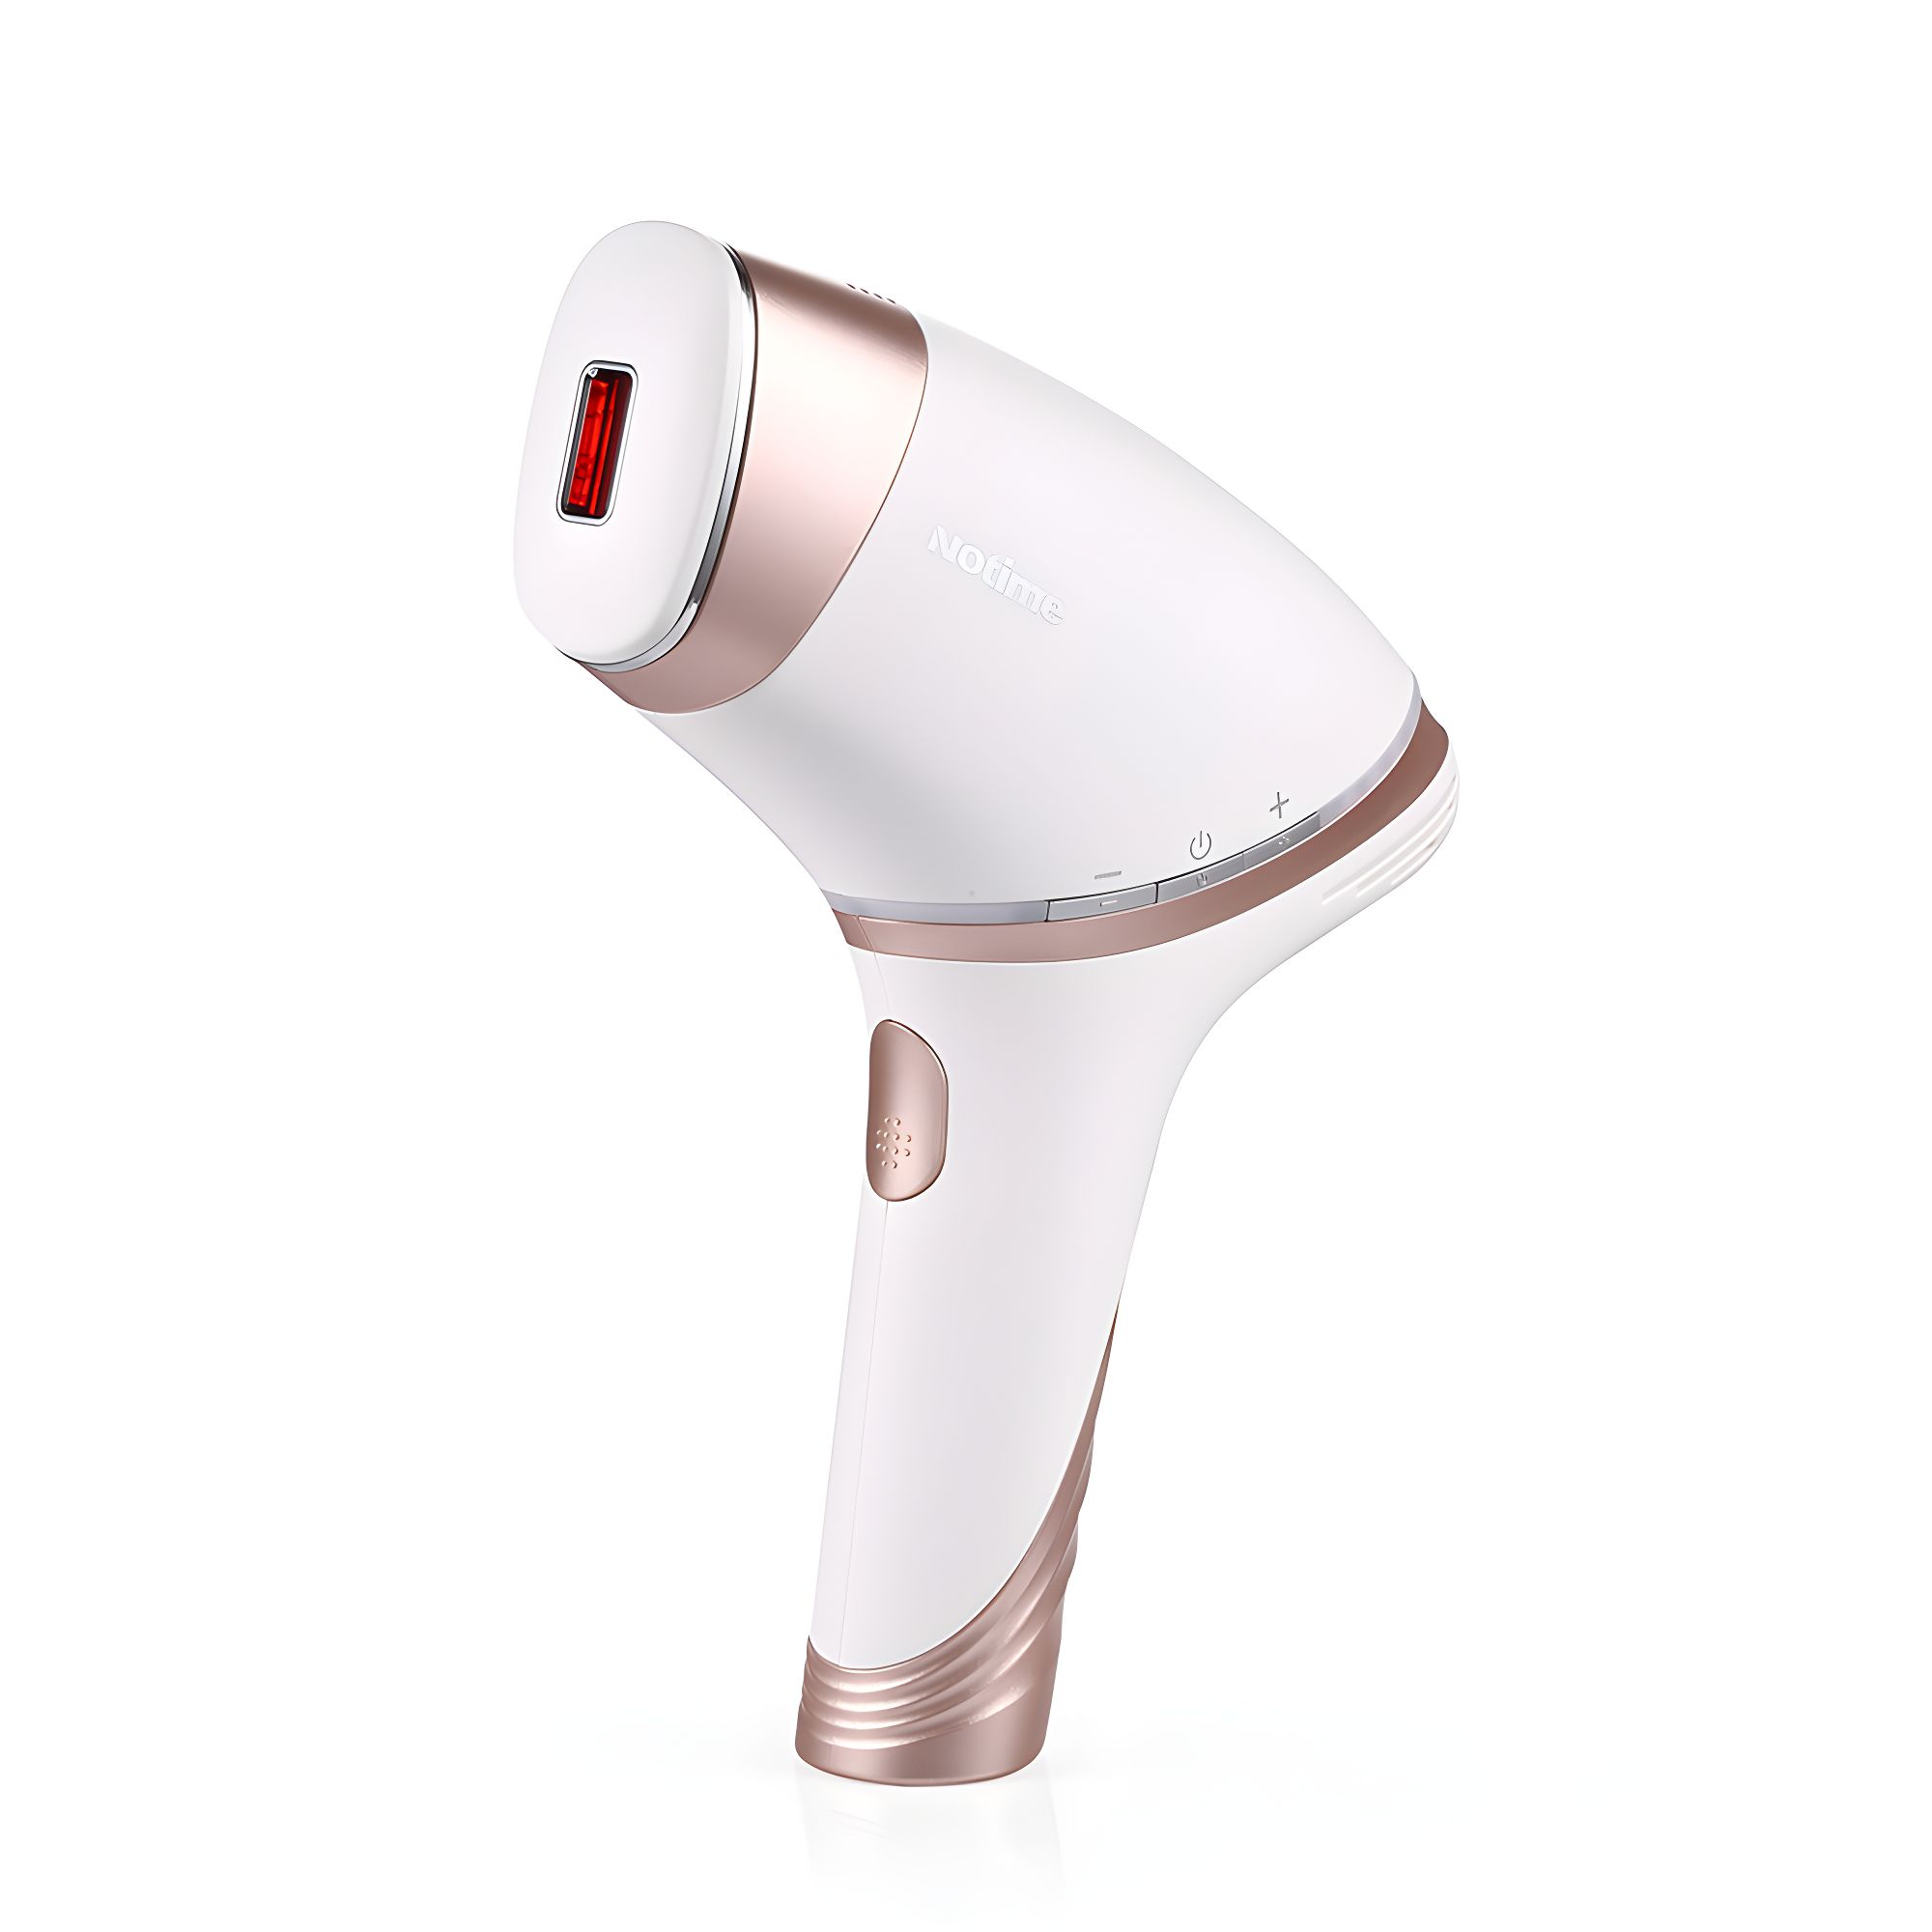 Notime - Icelady CL-0 Hair Removal Machine (Female)